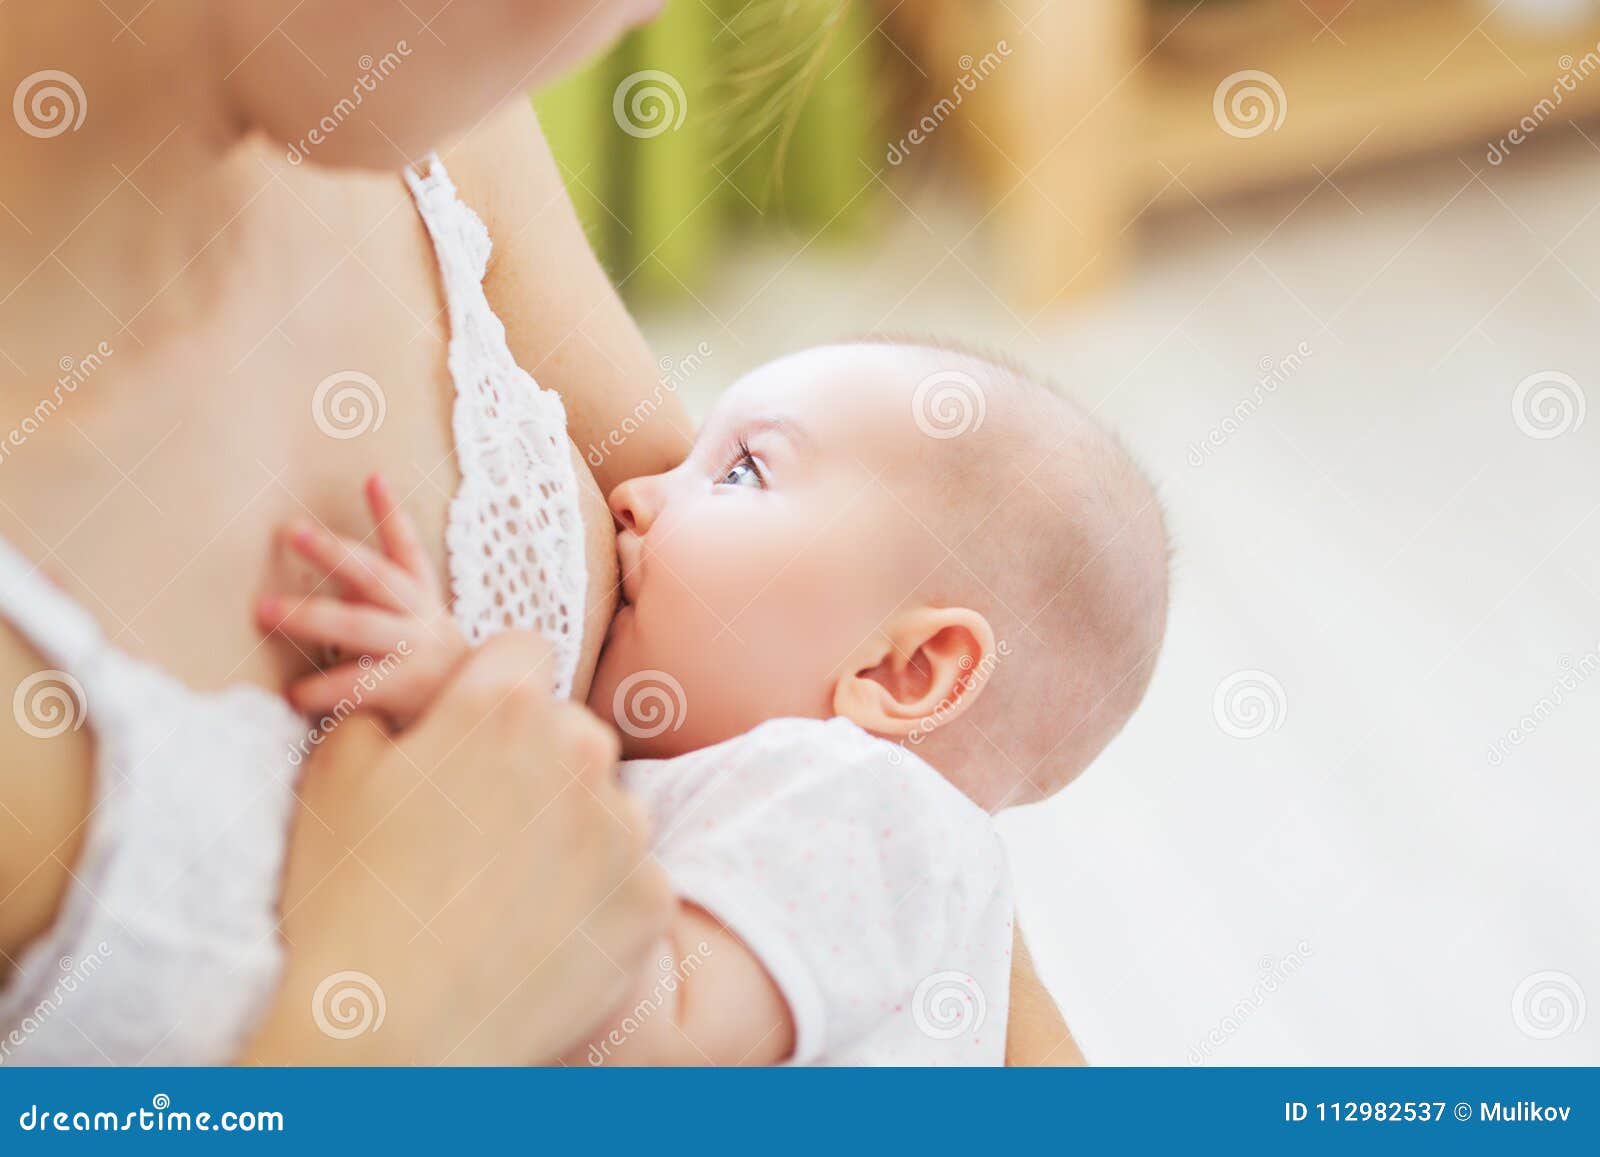 young mom breast feeding her newborn child. lactation infant concept. mother feed her baby son or daughter with breast milk